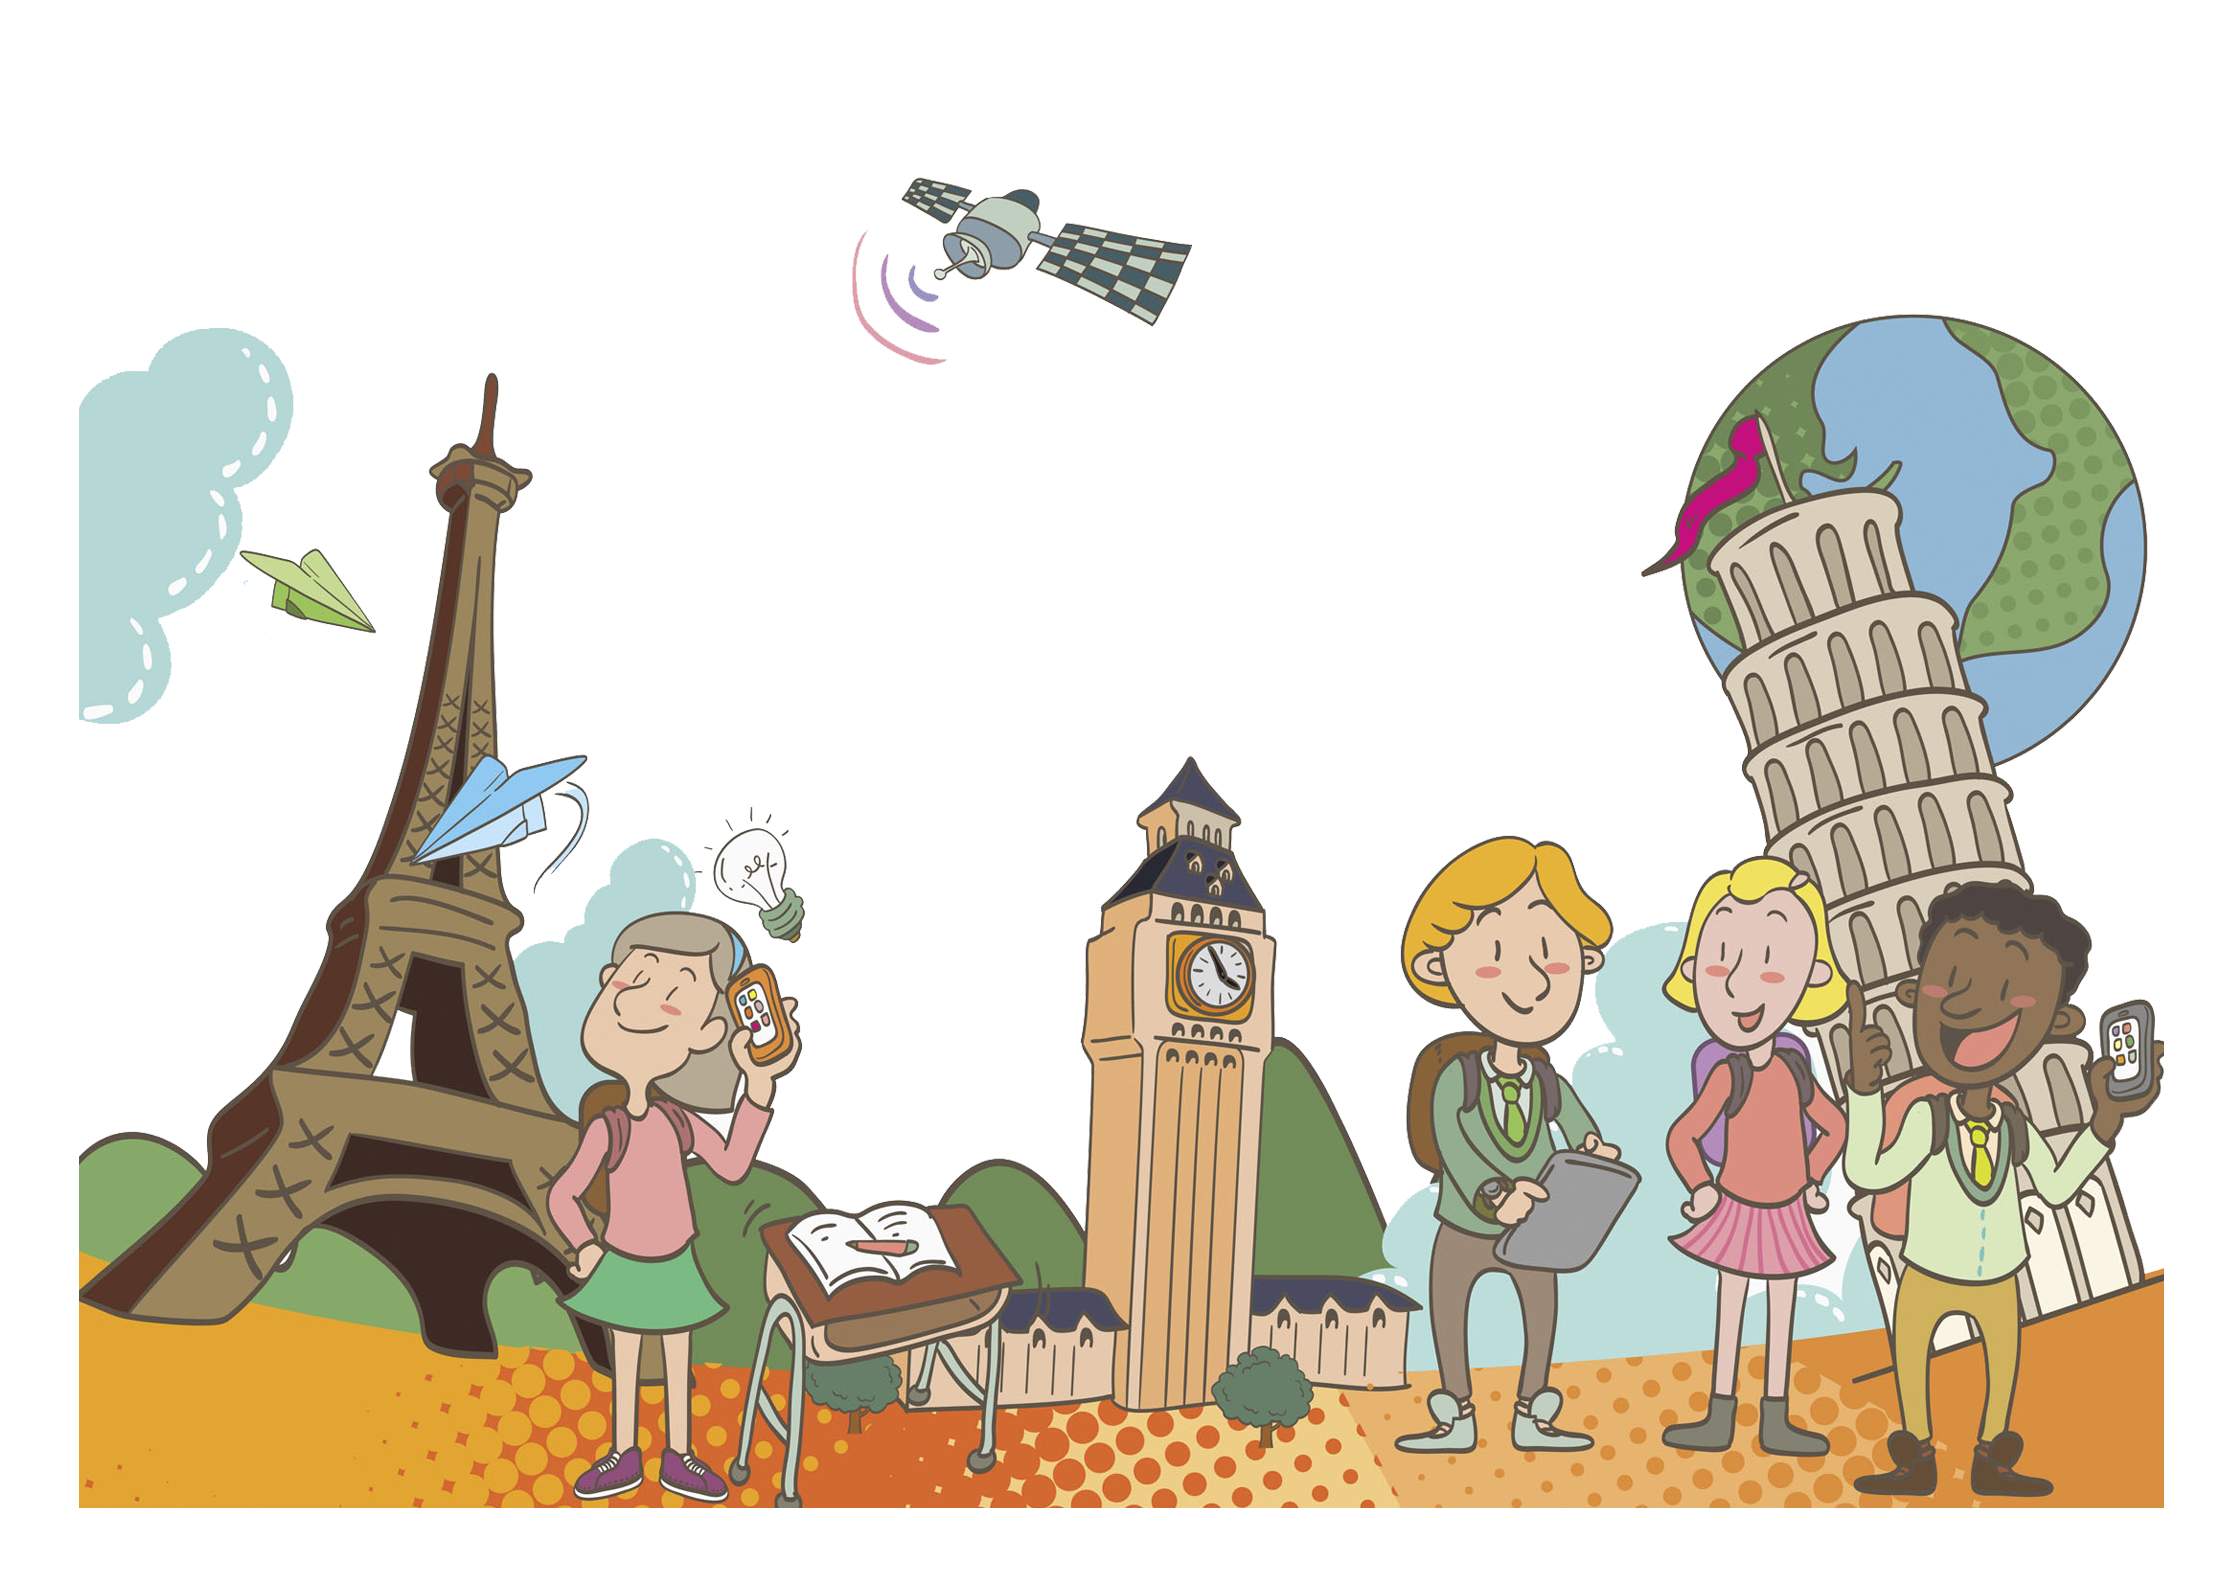 traveling clipart student travel